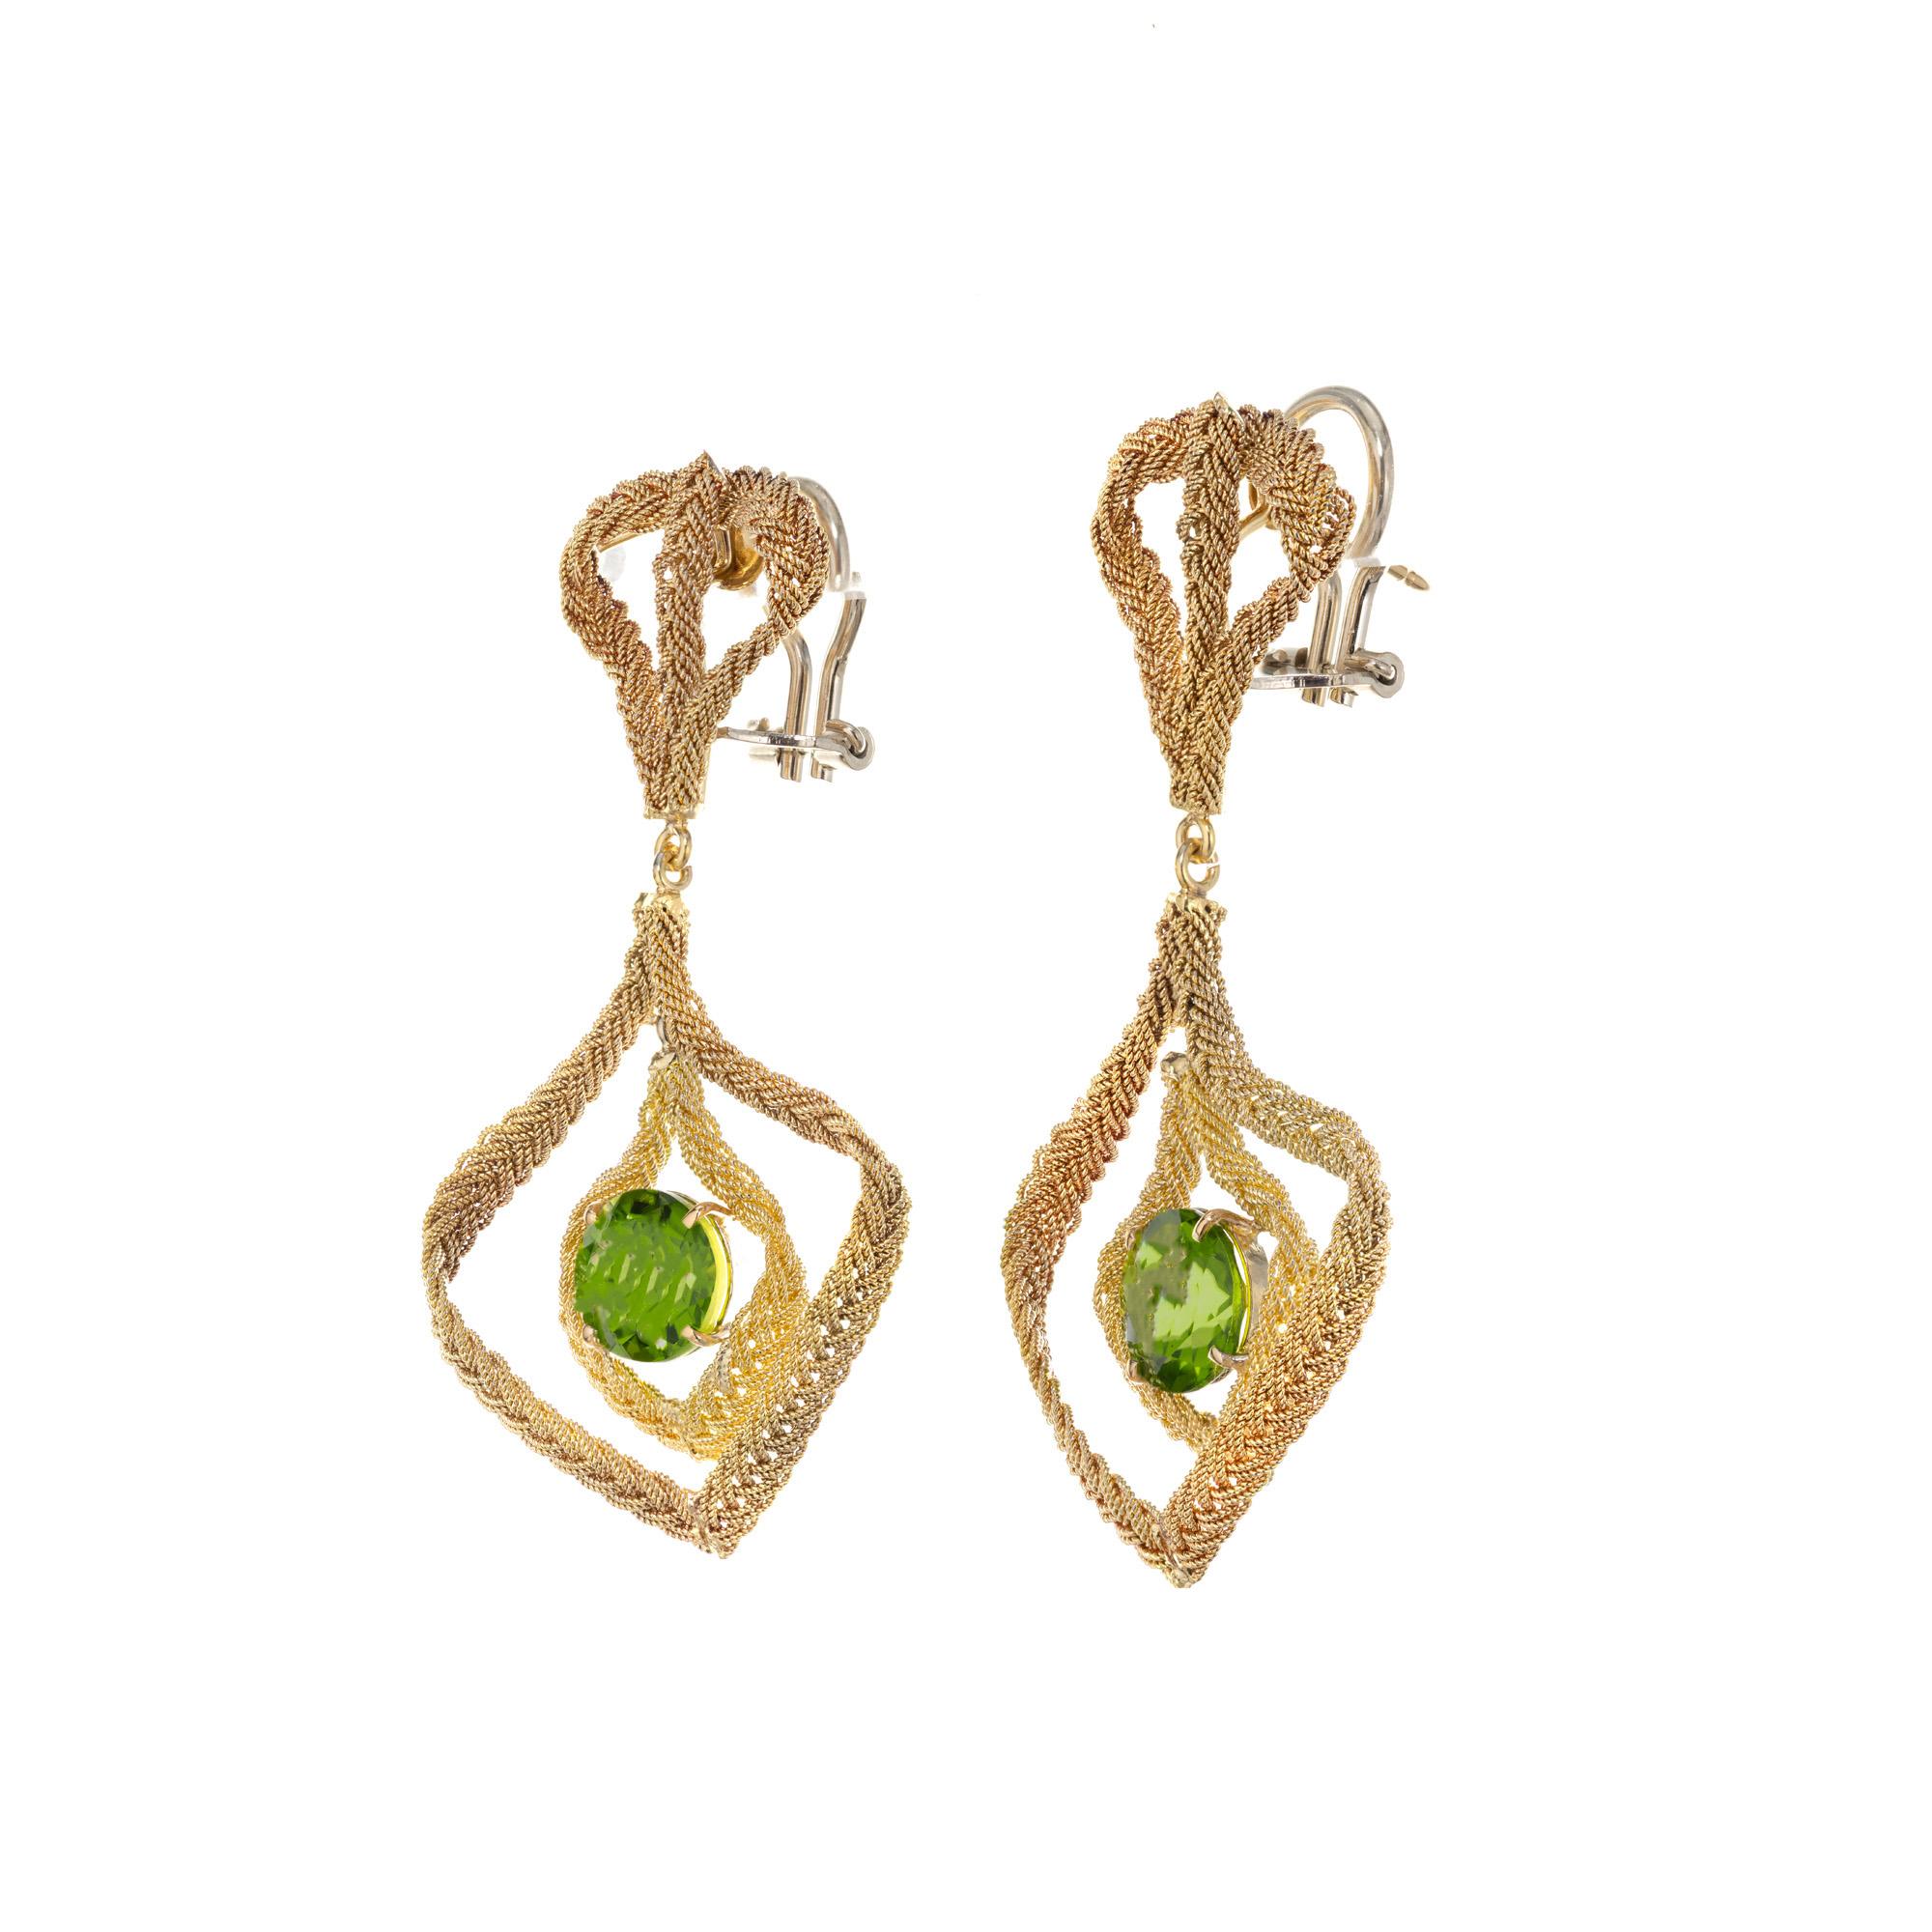 Peridot dangle earrings. Two round Peridot gemstones set in 18k yellow gold hand woven Italian clip post dangle, chandelier earrings. Even though these earrings are substantial, they are light and comfortable to wear. 

2 round green Peridot,